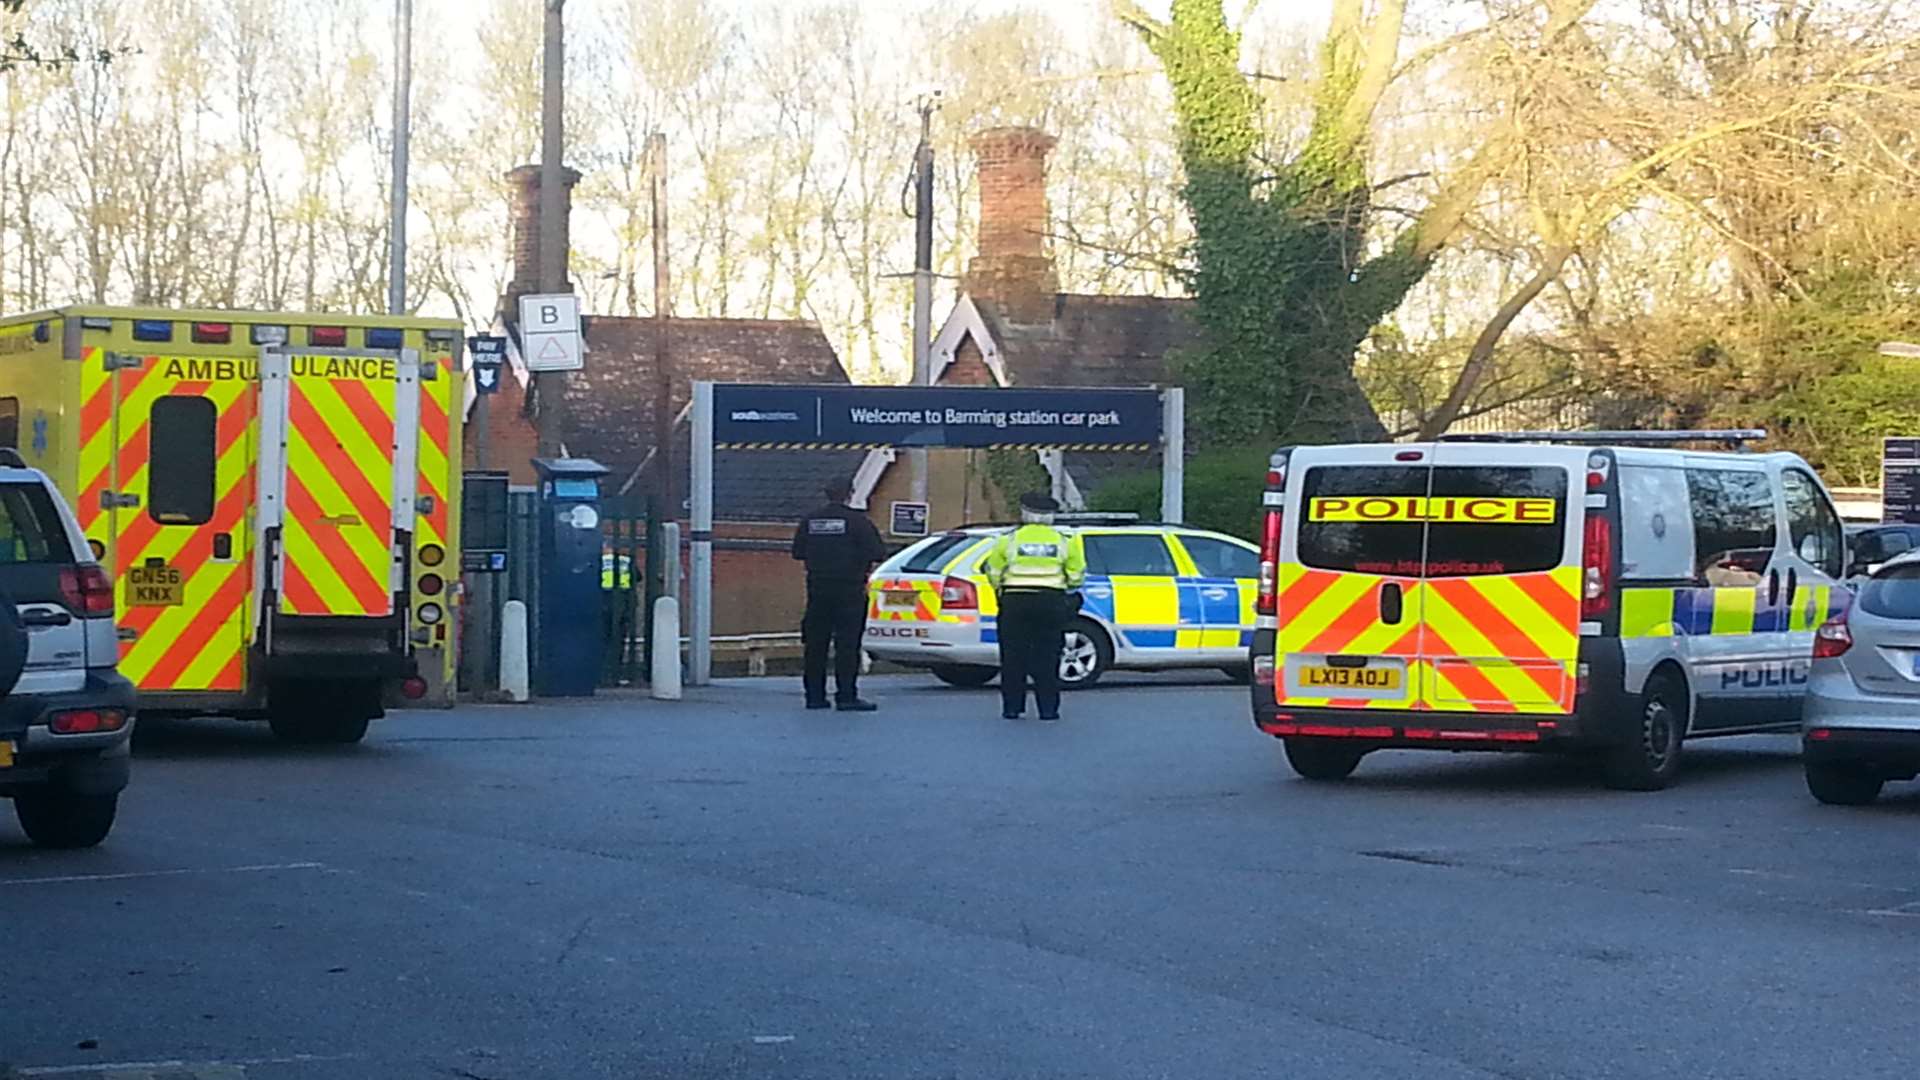 The scene outside Barming Railway Station after the tragic death of Natalie Gray